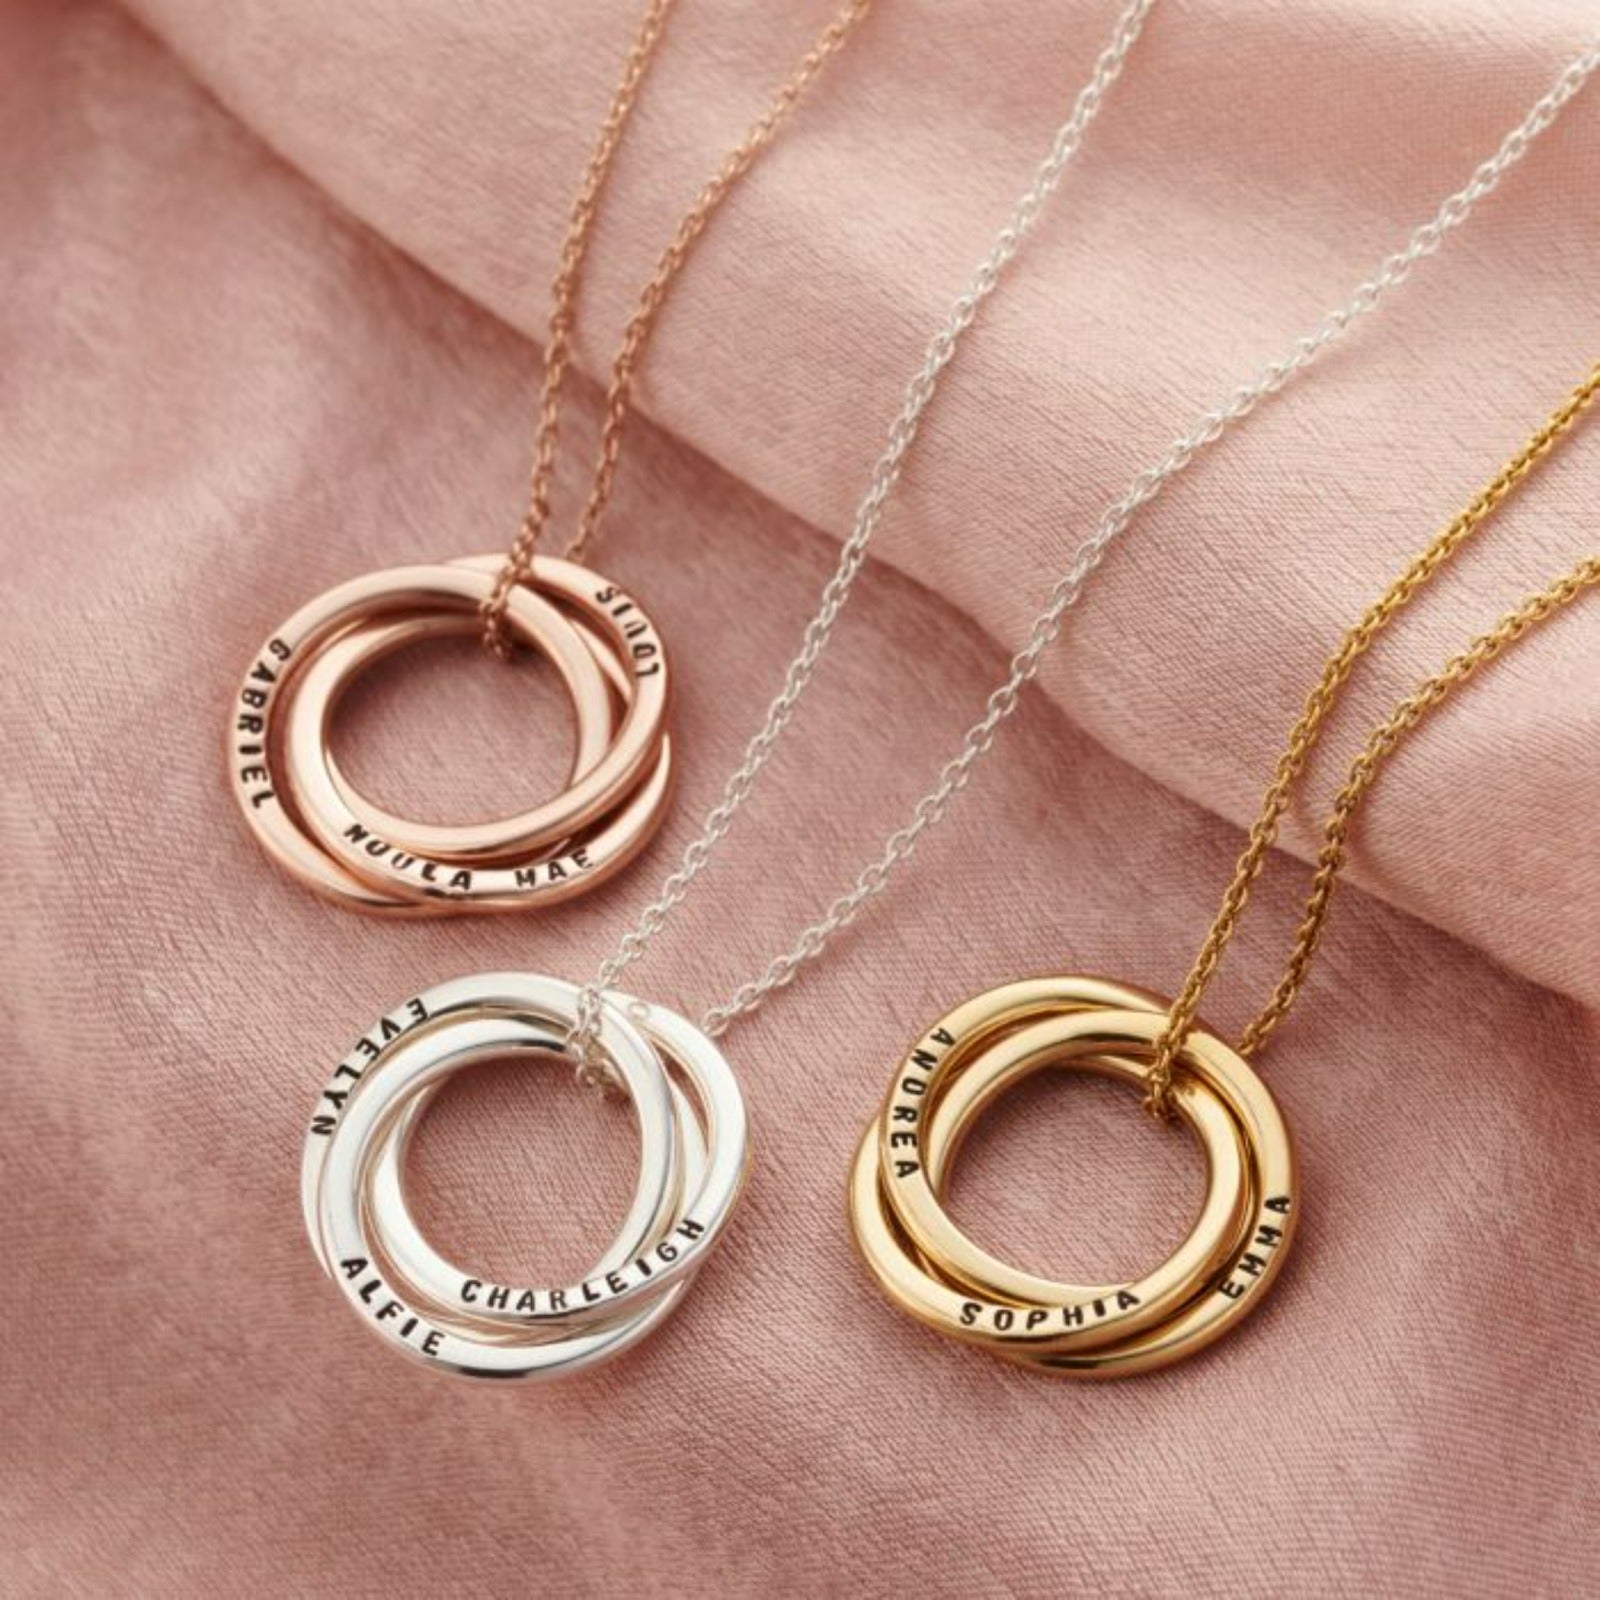 9ct White Gold and Diamond Personalised Family Name 3 Circles Necklace or  Pendant Three Rings up to 6 Names Engraved Gift for Mom Mum Her - Etsy